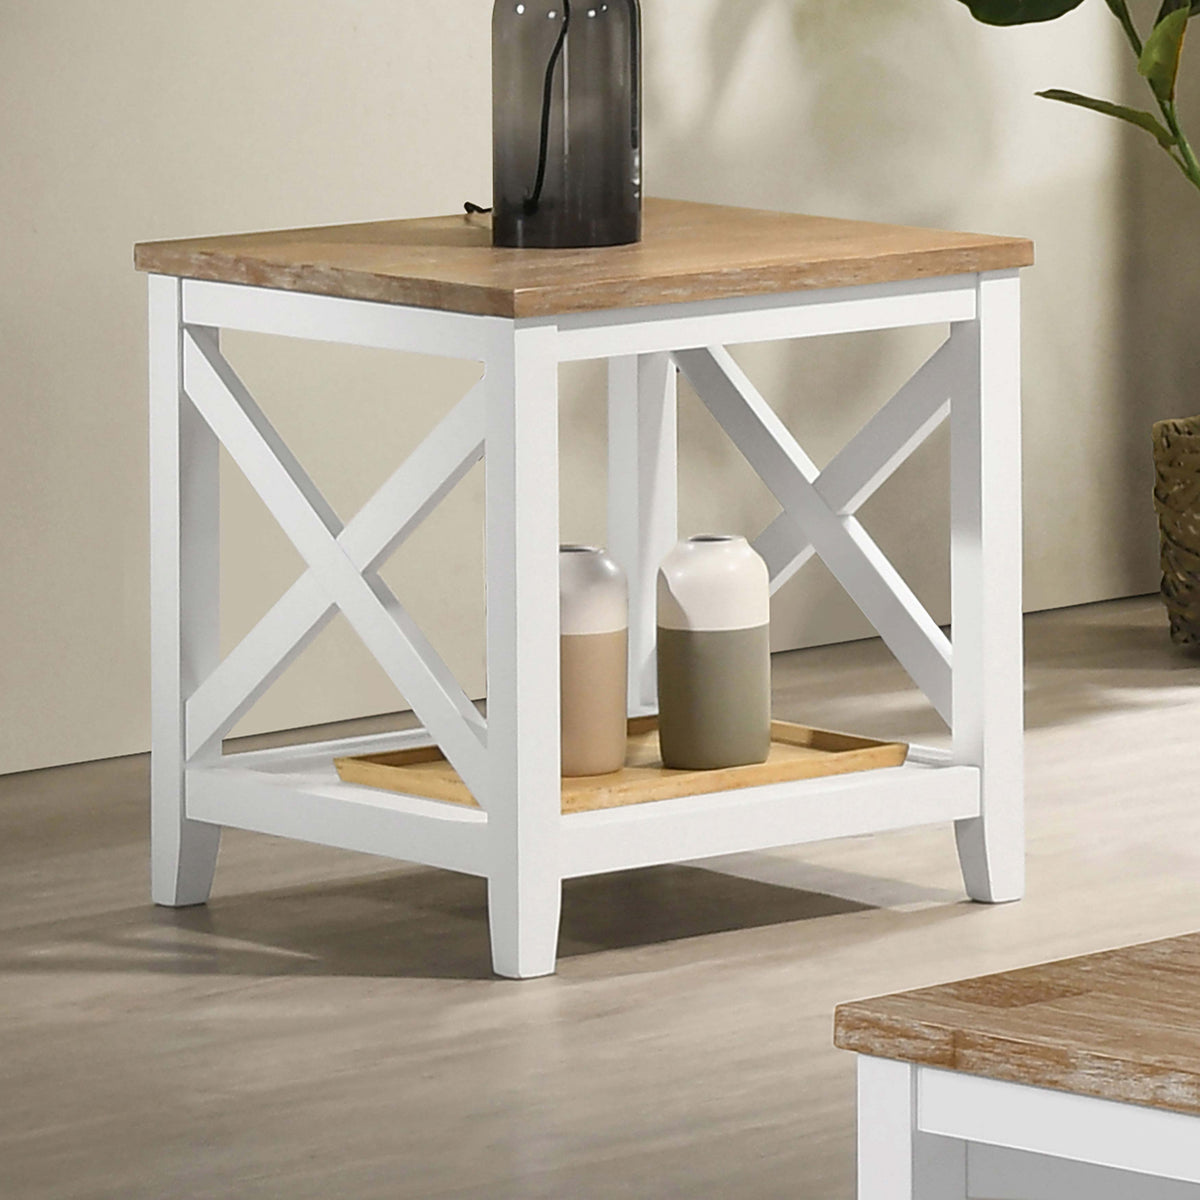 Maisy Square Wooden End Table With Shelf Brown and White  Las Vegas Furniture Stores